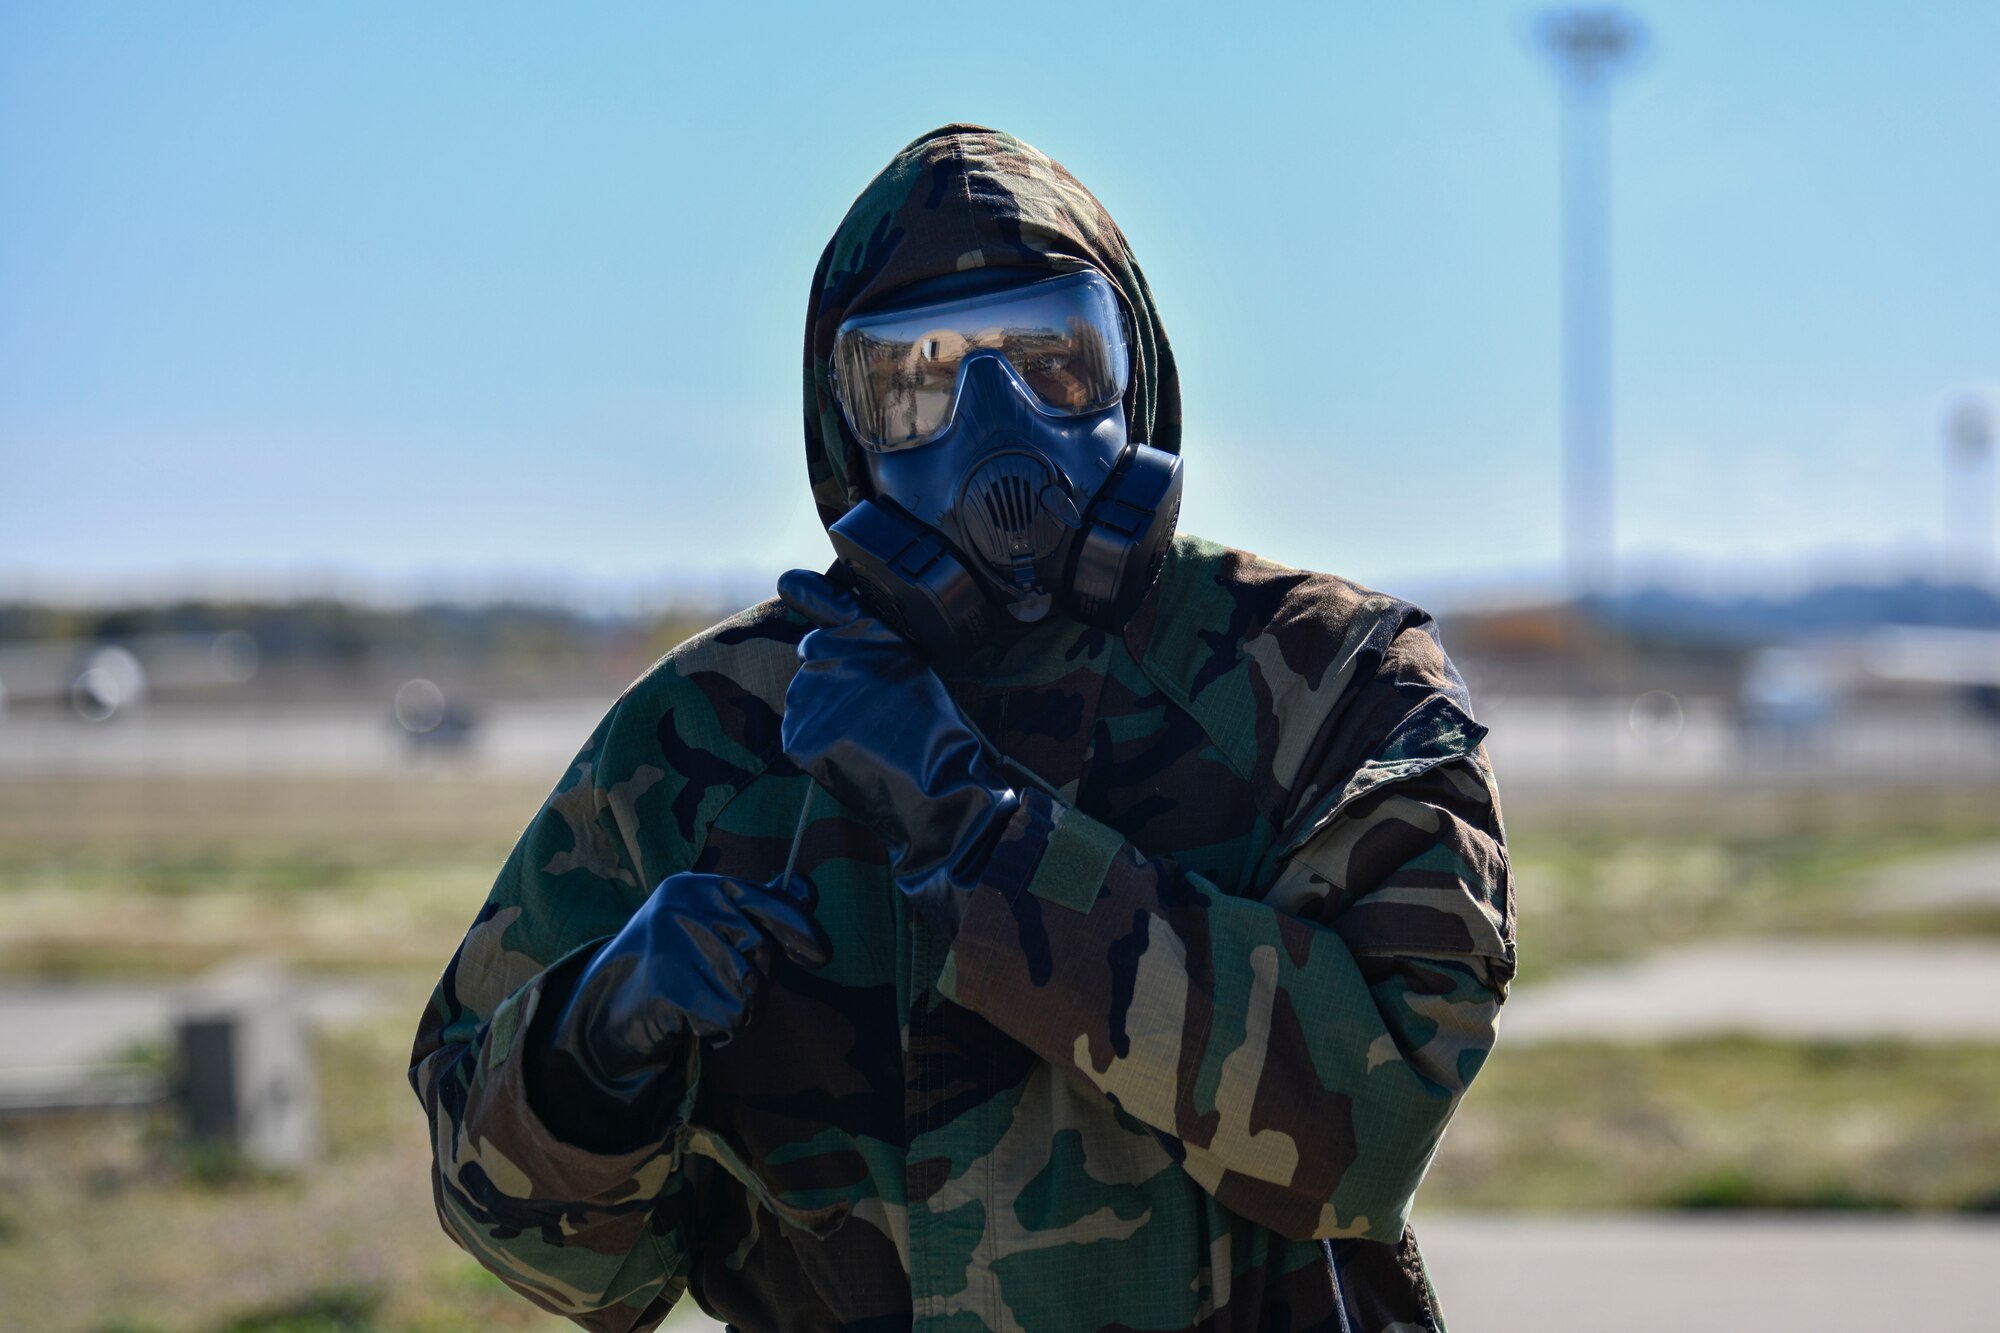 U.S. Air Force Airman from Team Fairchild tightens the draw string fastening on their Mission Oriented Protective Posture equipment during a large readiness exercise at Fairchild Air Force Base, Washington, Oct. 7, 2021. The scenario required Airmen to properly don their gear during a chemical, biological, radiological and nuclear attack scenario. (U.S. Air Force photo by Senior Airman Ryan Gomez)